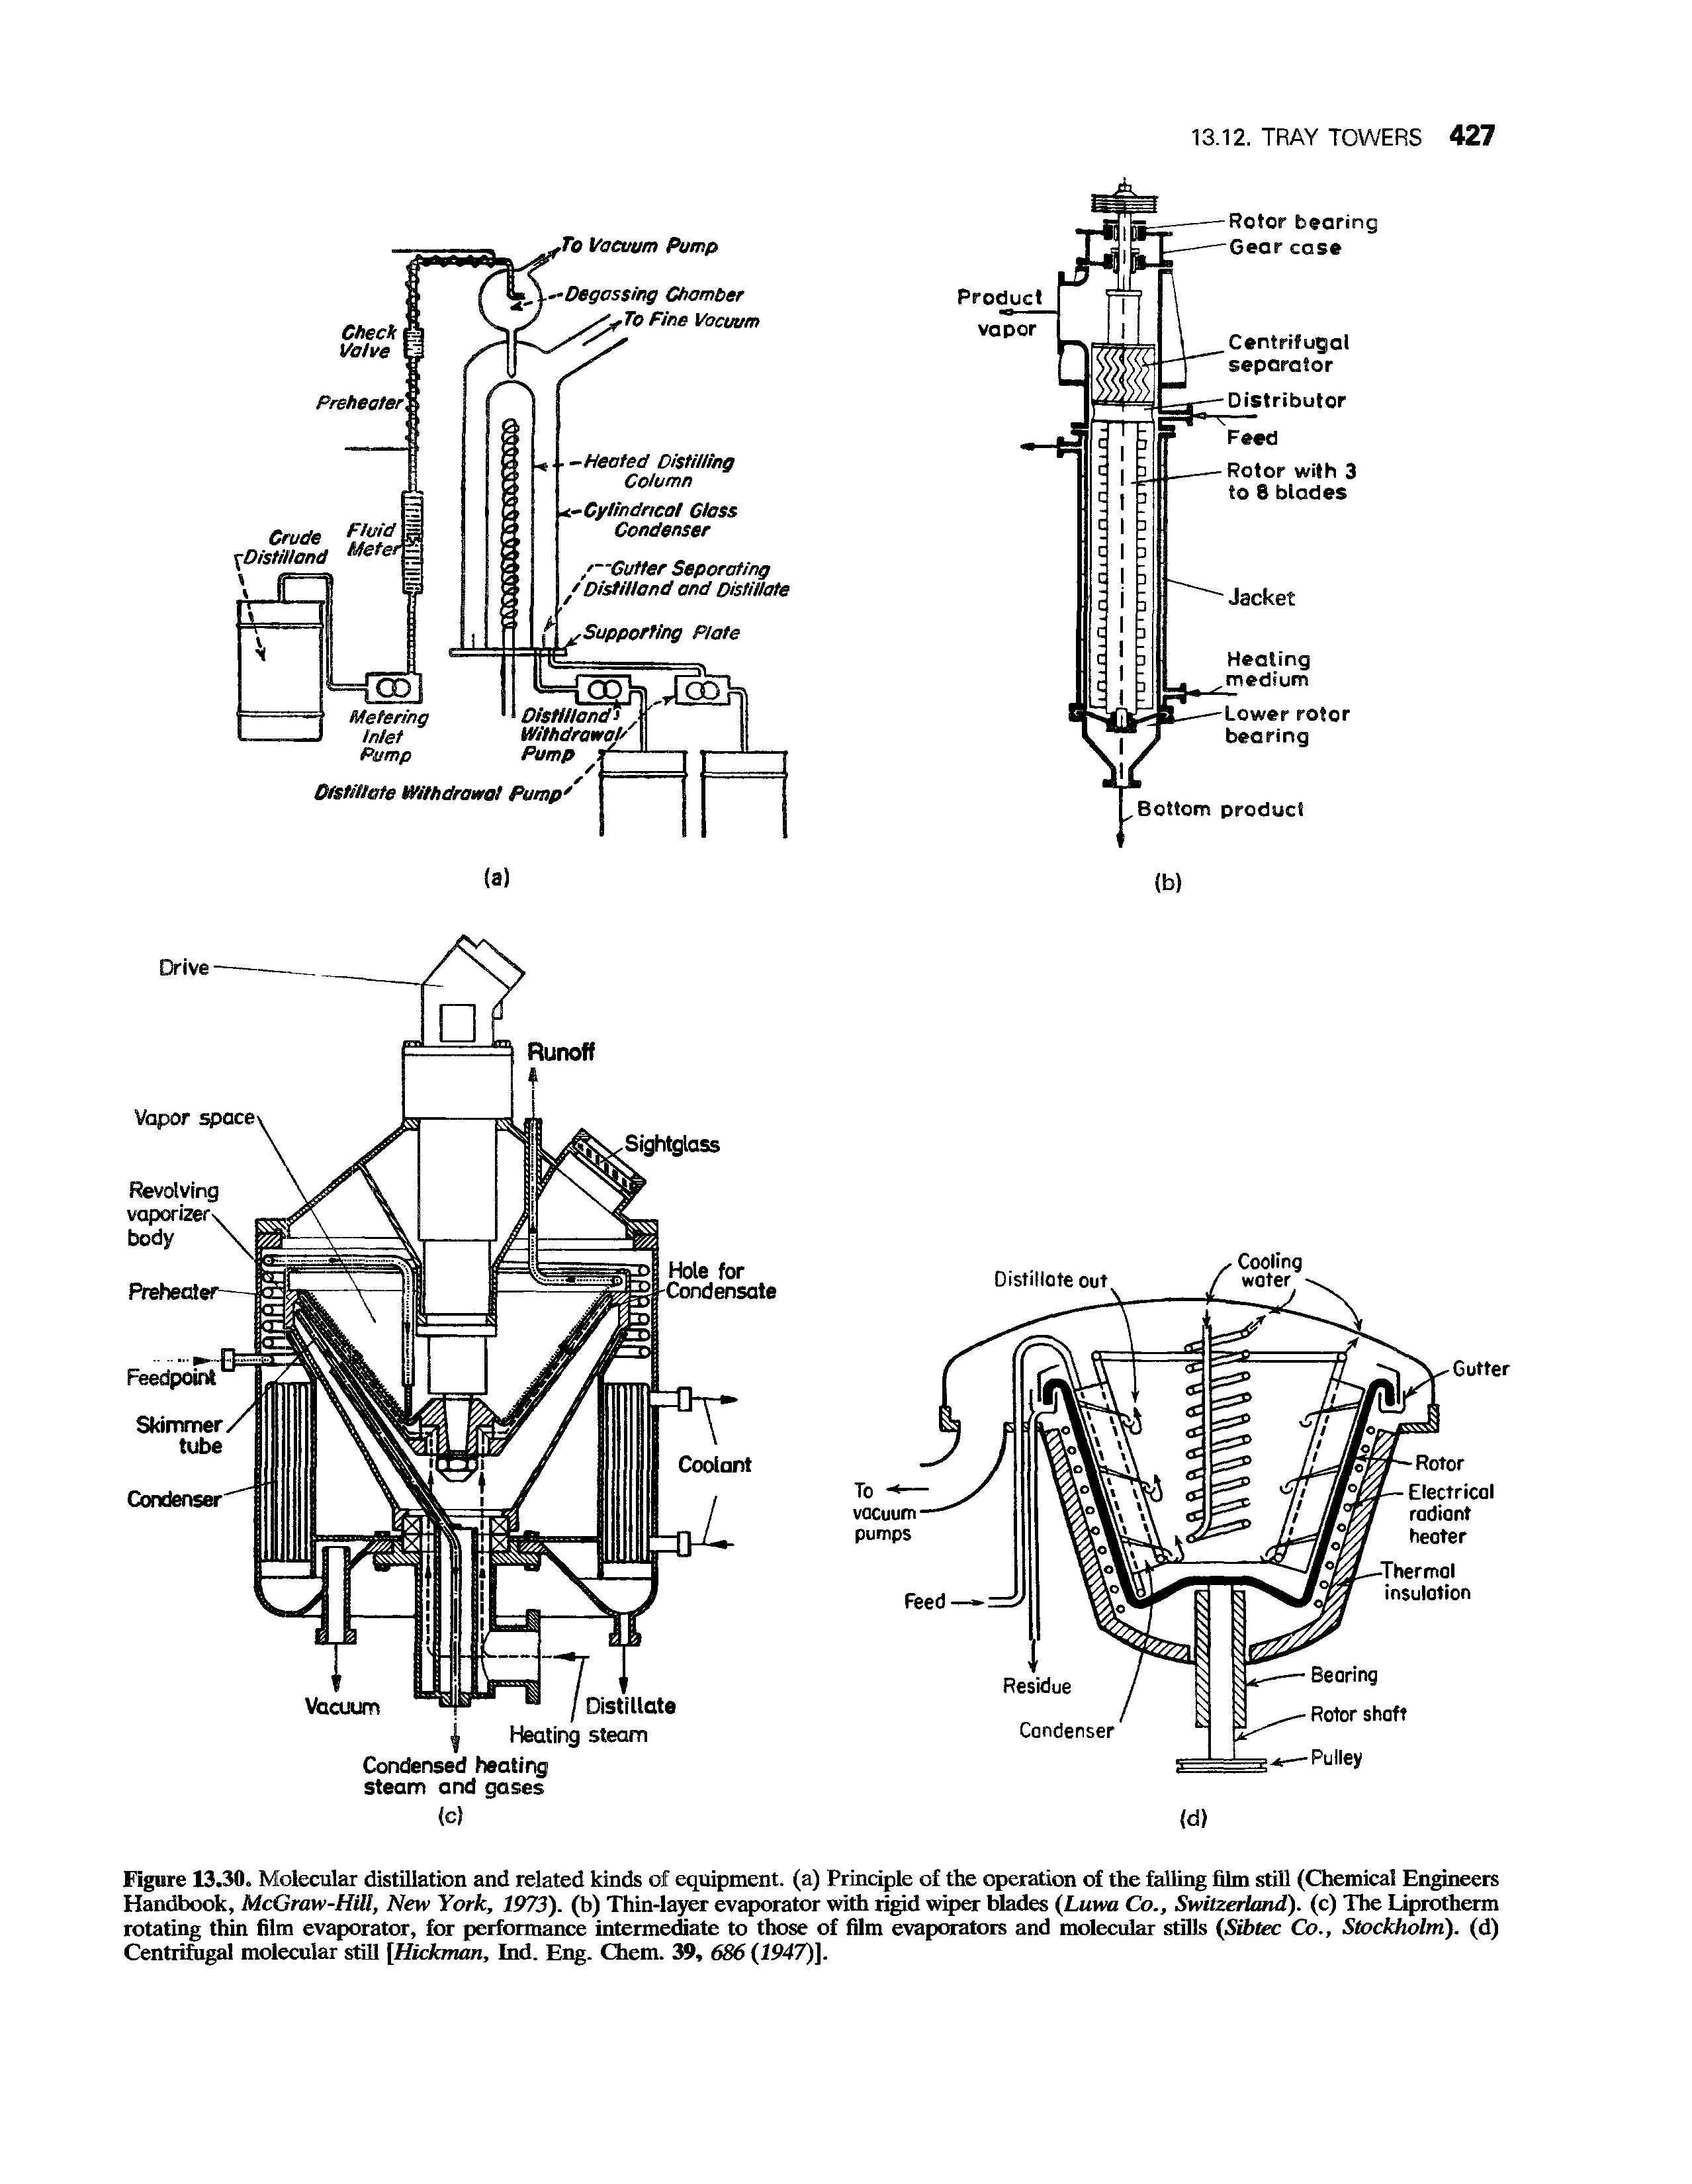 Figure 13.30. Molecular distillation and related kinds of equipment, (a) Principle of the operation of the falling film still (Chemical Engineers Handbook, McGraw-Hill, New York, 1973). (b) Thin-layer evaporator with rigid wiper blades (Luwa Co., Switzerland), (c) The Liprotherm rotating thin film evaporator, for performance intermediate to those of film evaporators and molecular stills (Sibtec Co., Stockholm), (d) Centrifugal molecular still [Hickman, Ind. Eng. Chem. 39, 686 (1947)].